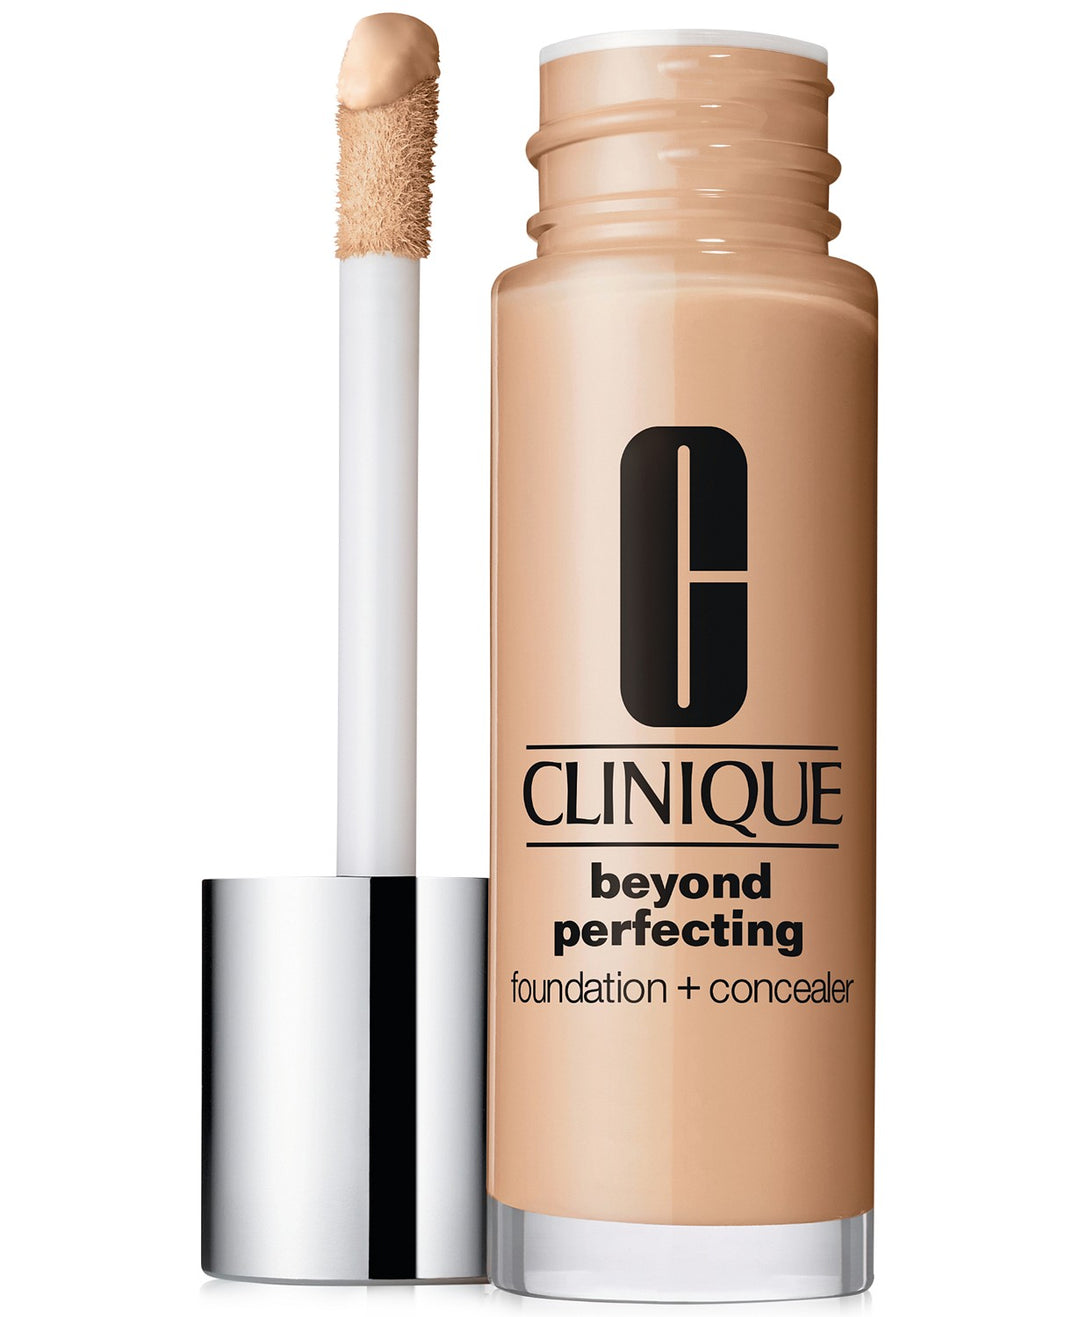 Beyond Perfecting Foundation + Concealer.